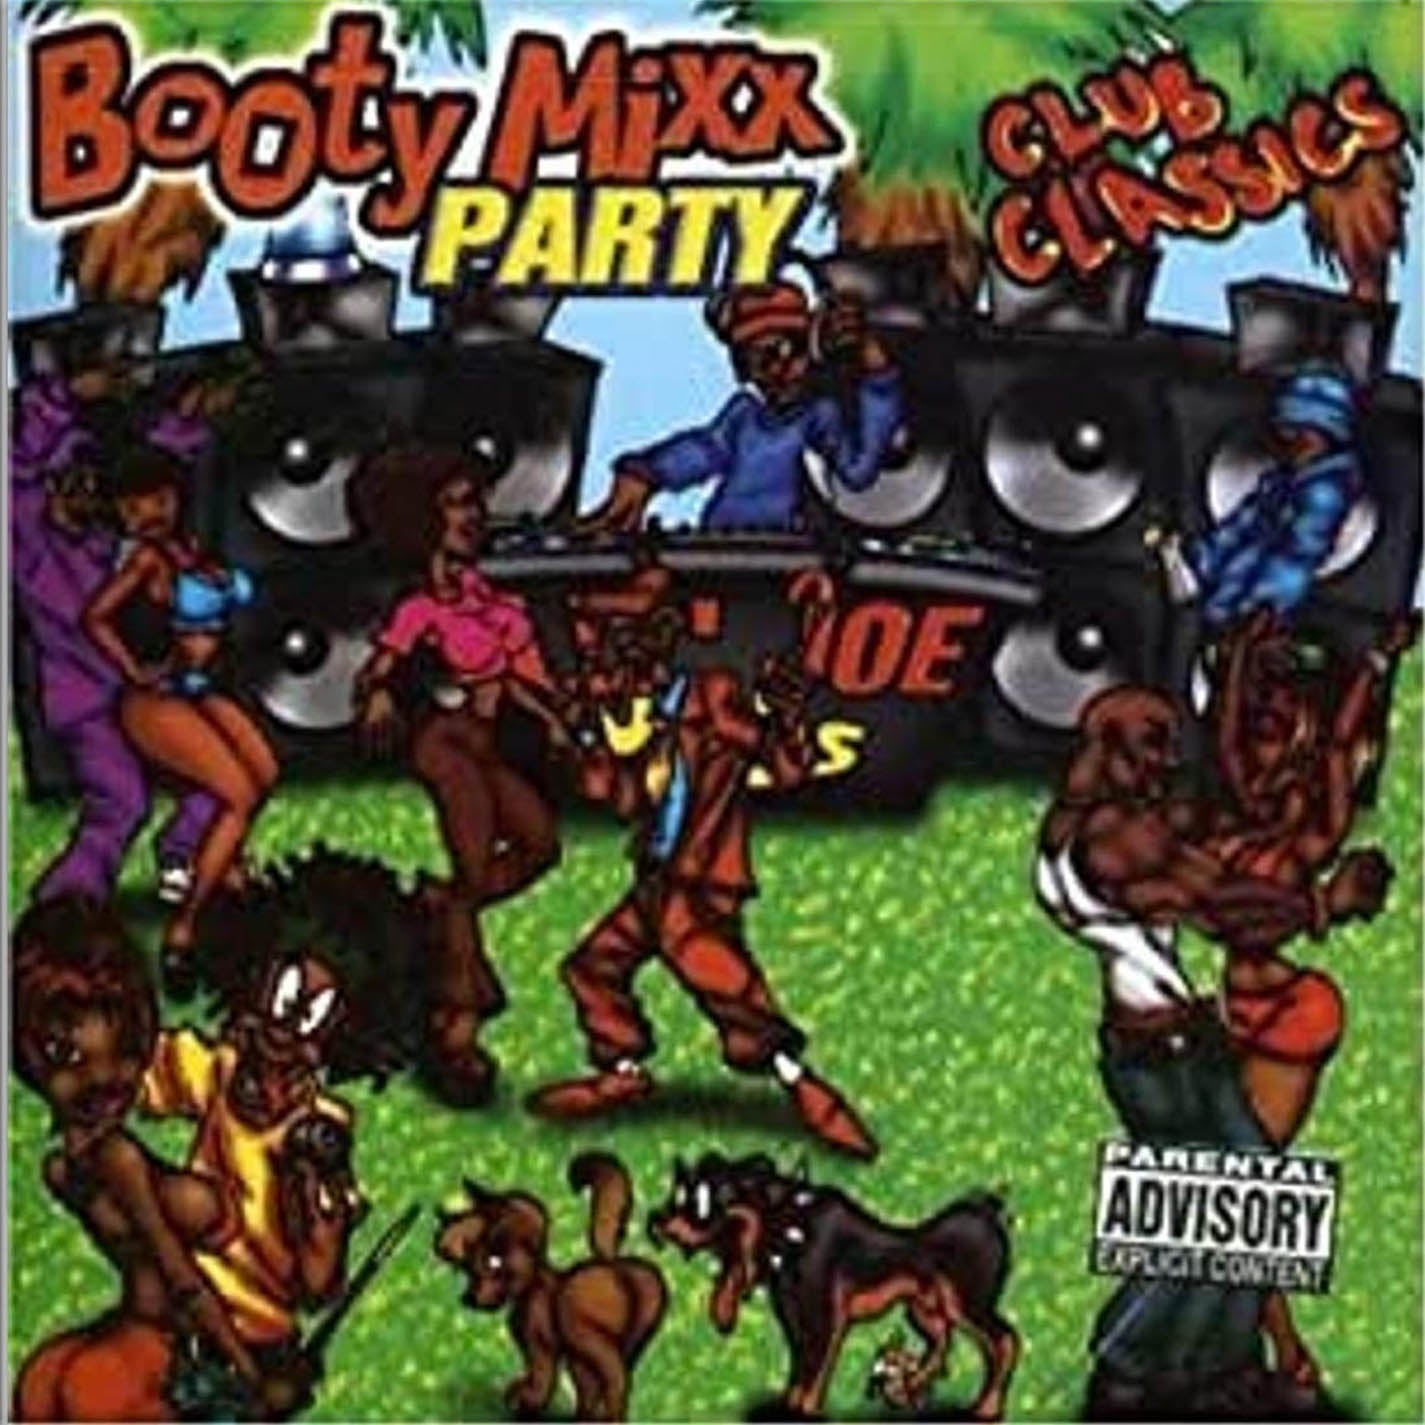 CLUB CLASSICS - THE BOOTY MIX PARTY (CD LP) c1996